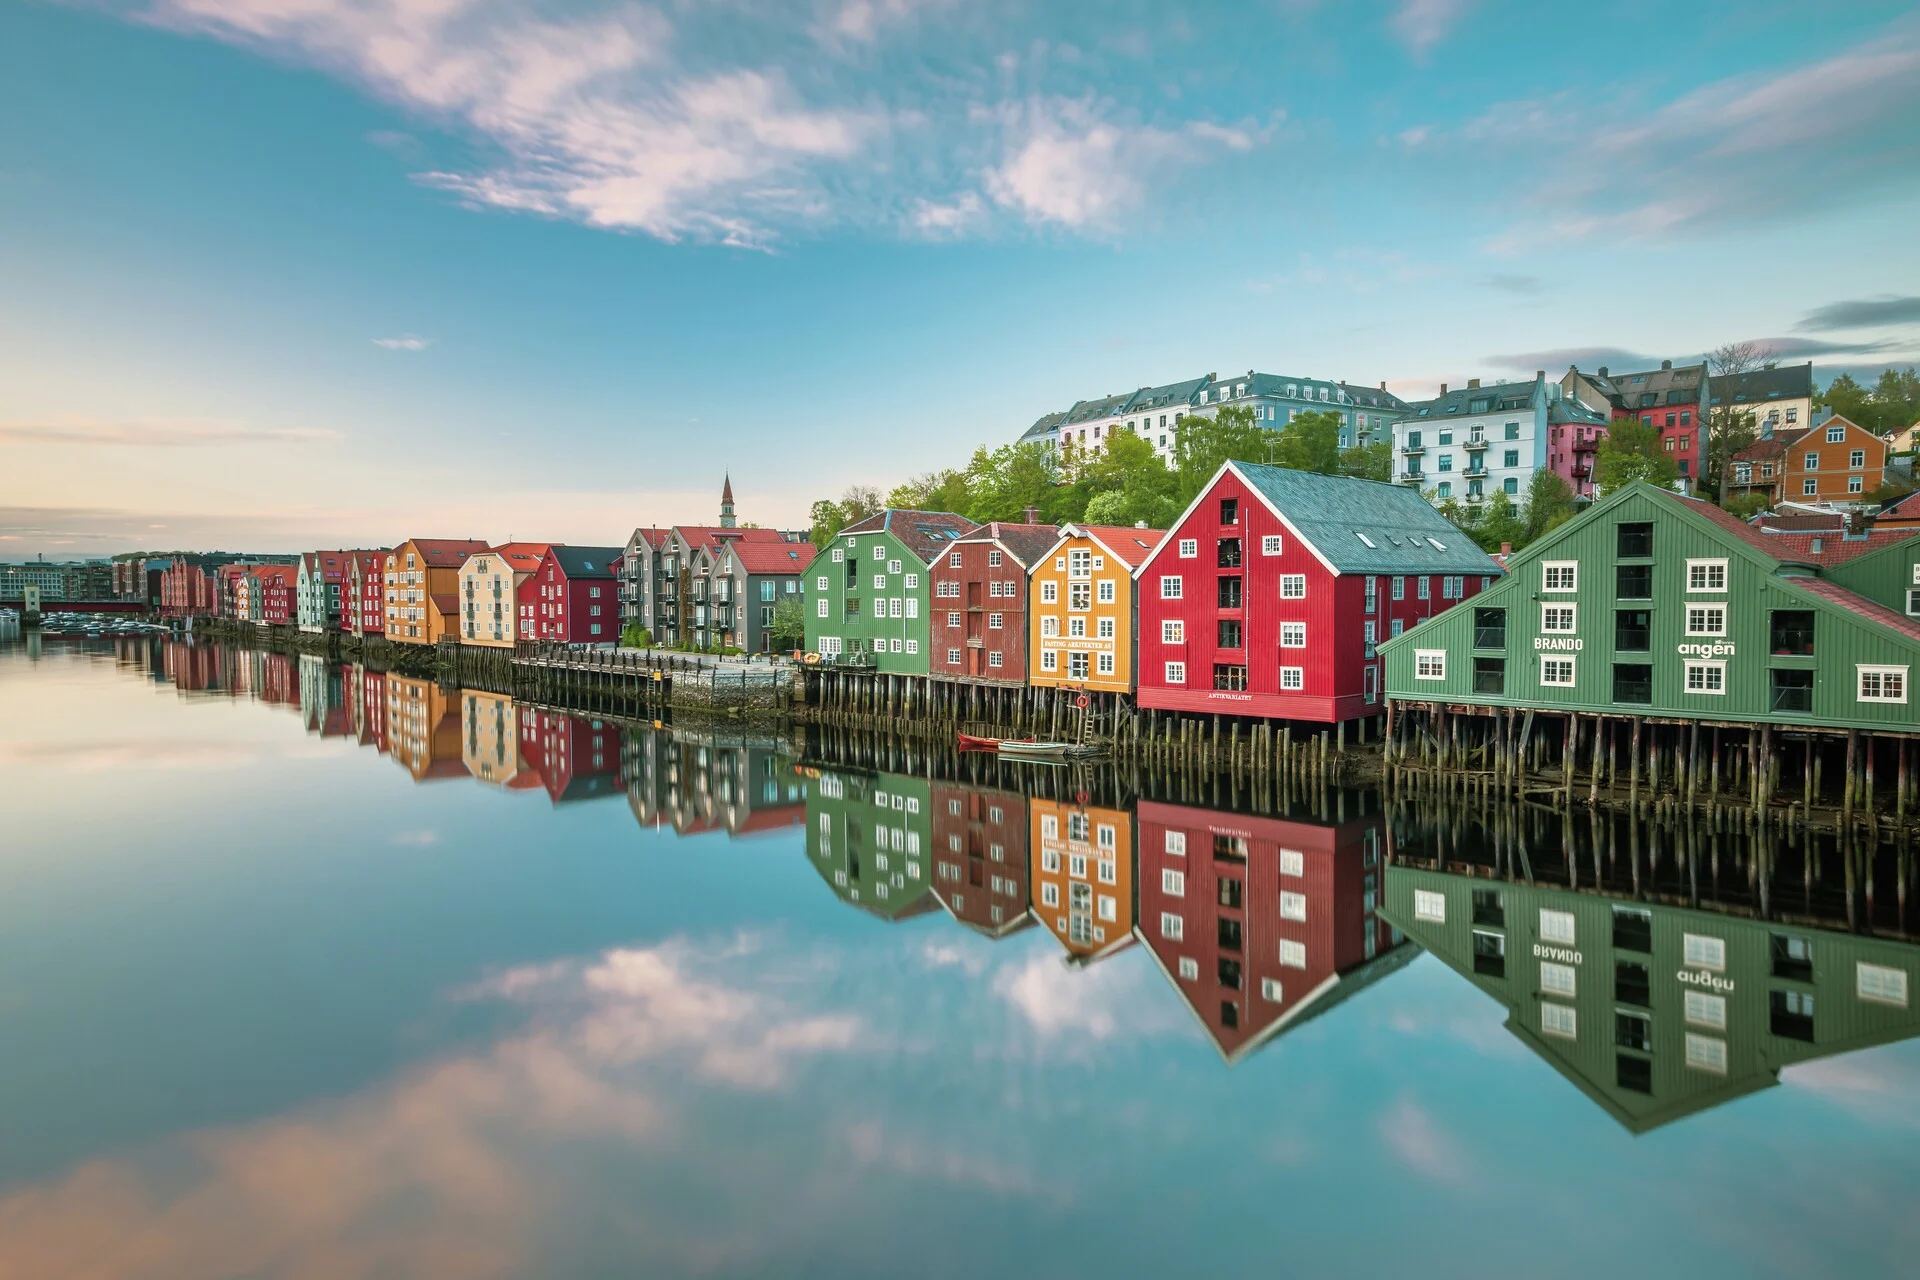 Colourful houses on the River Nid in the Norwegian port town of Trondheim